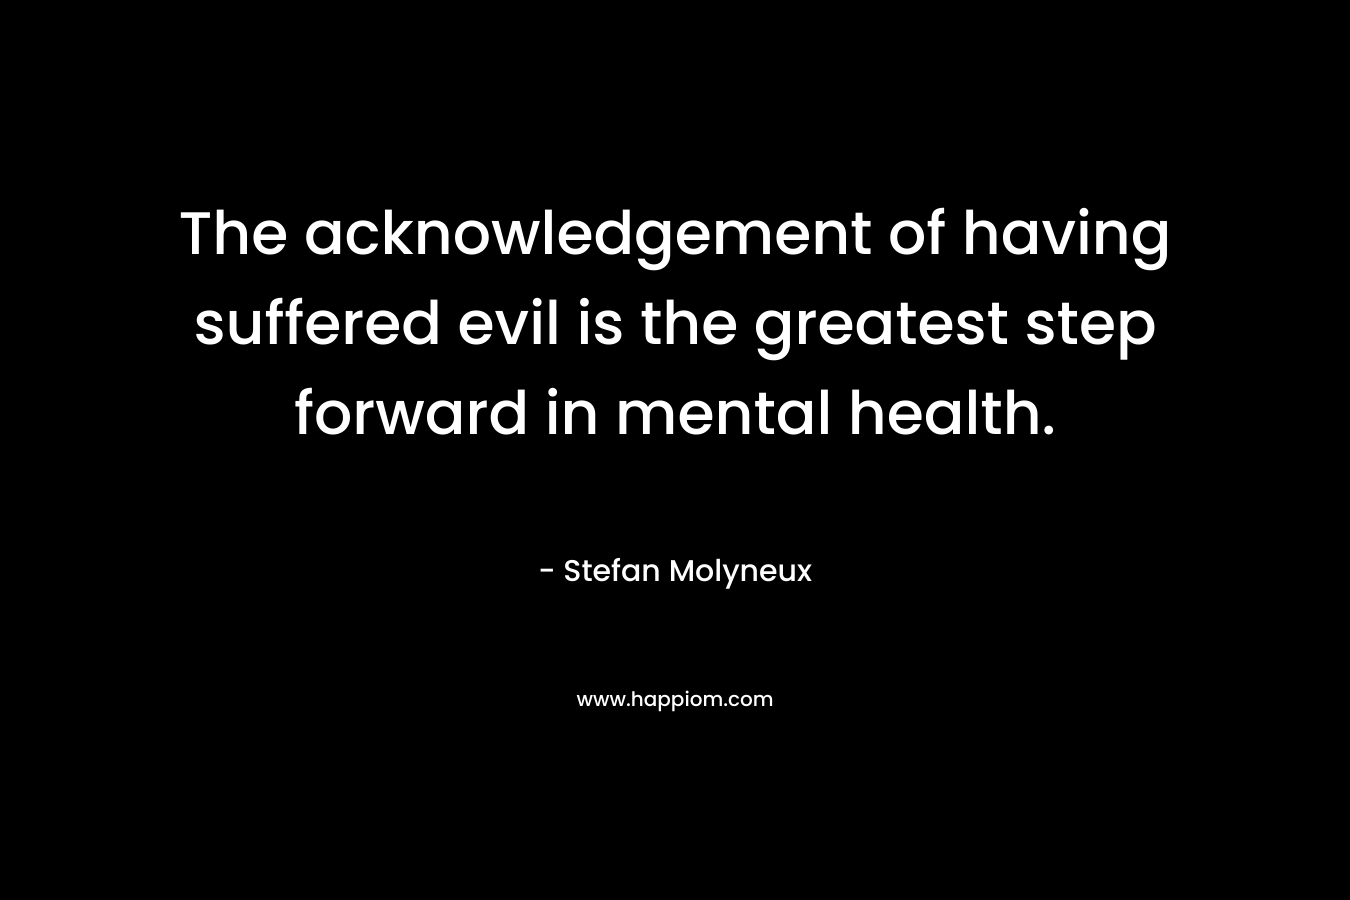 The acknowledgement of having suffered evil is the greatest step forward in mental health.